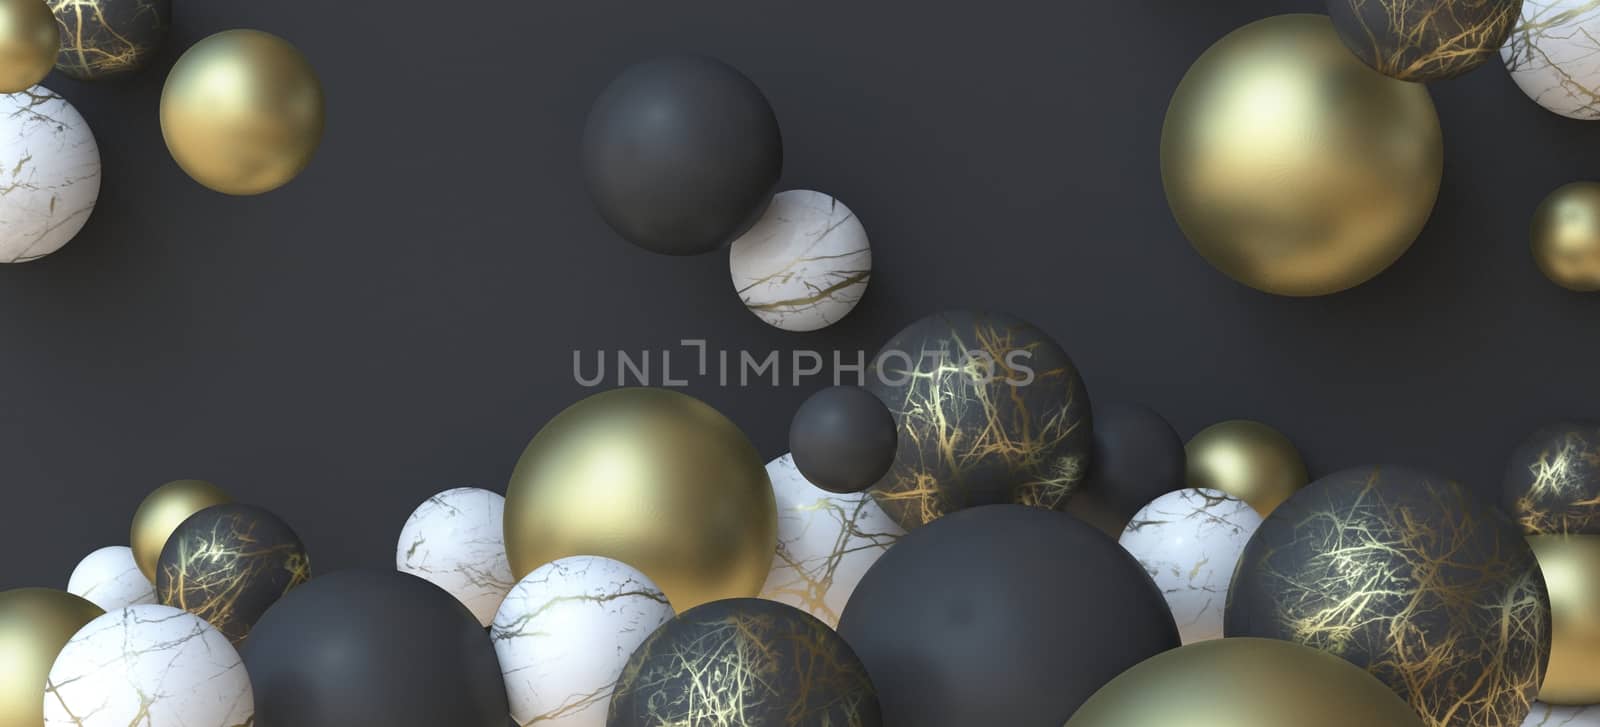 Abstract background made of different material falling balls 3D by djmilic